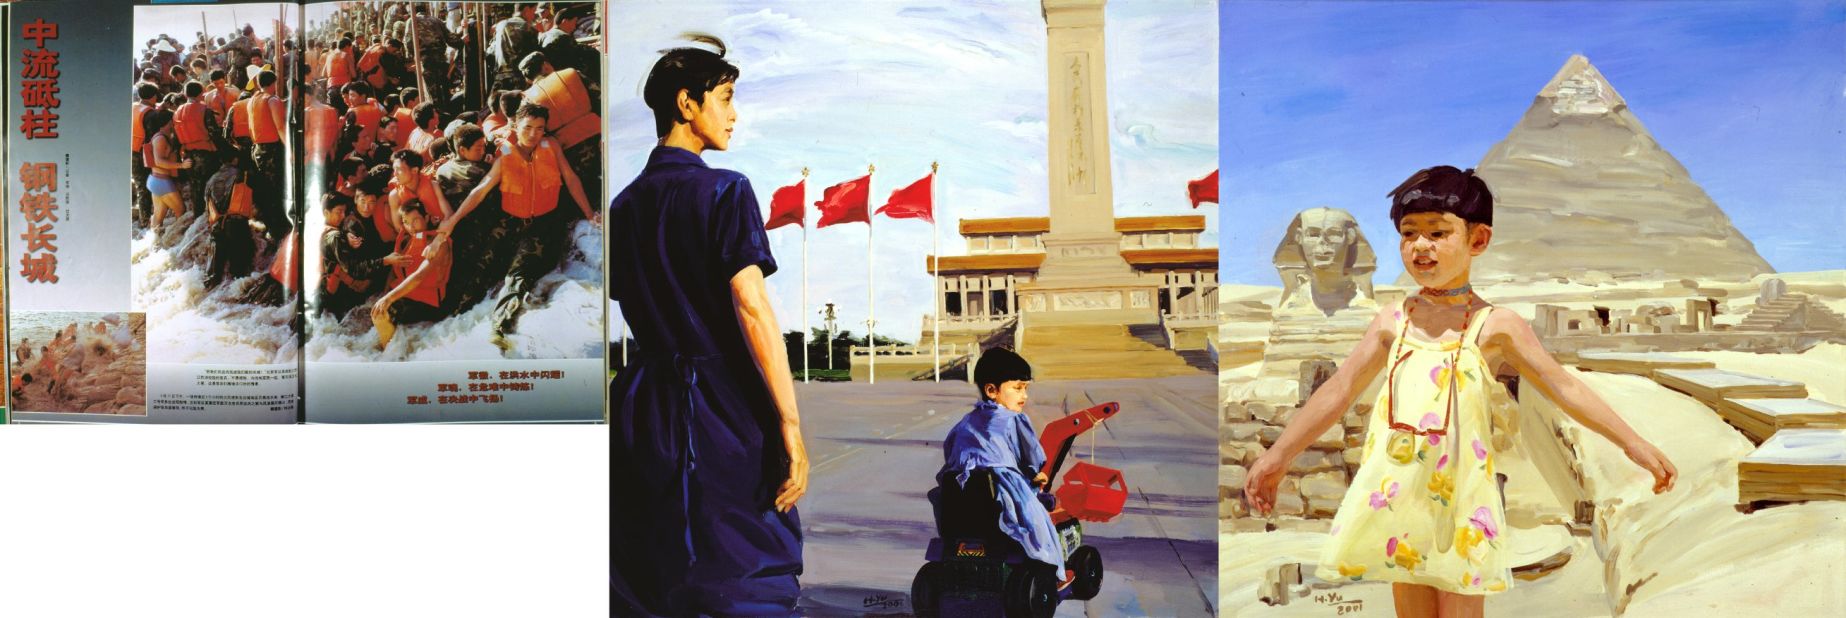 "Thirty-two years old with daughter in Tiananmen Square" (1998)